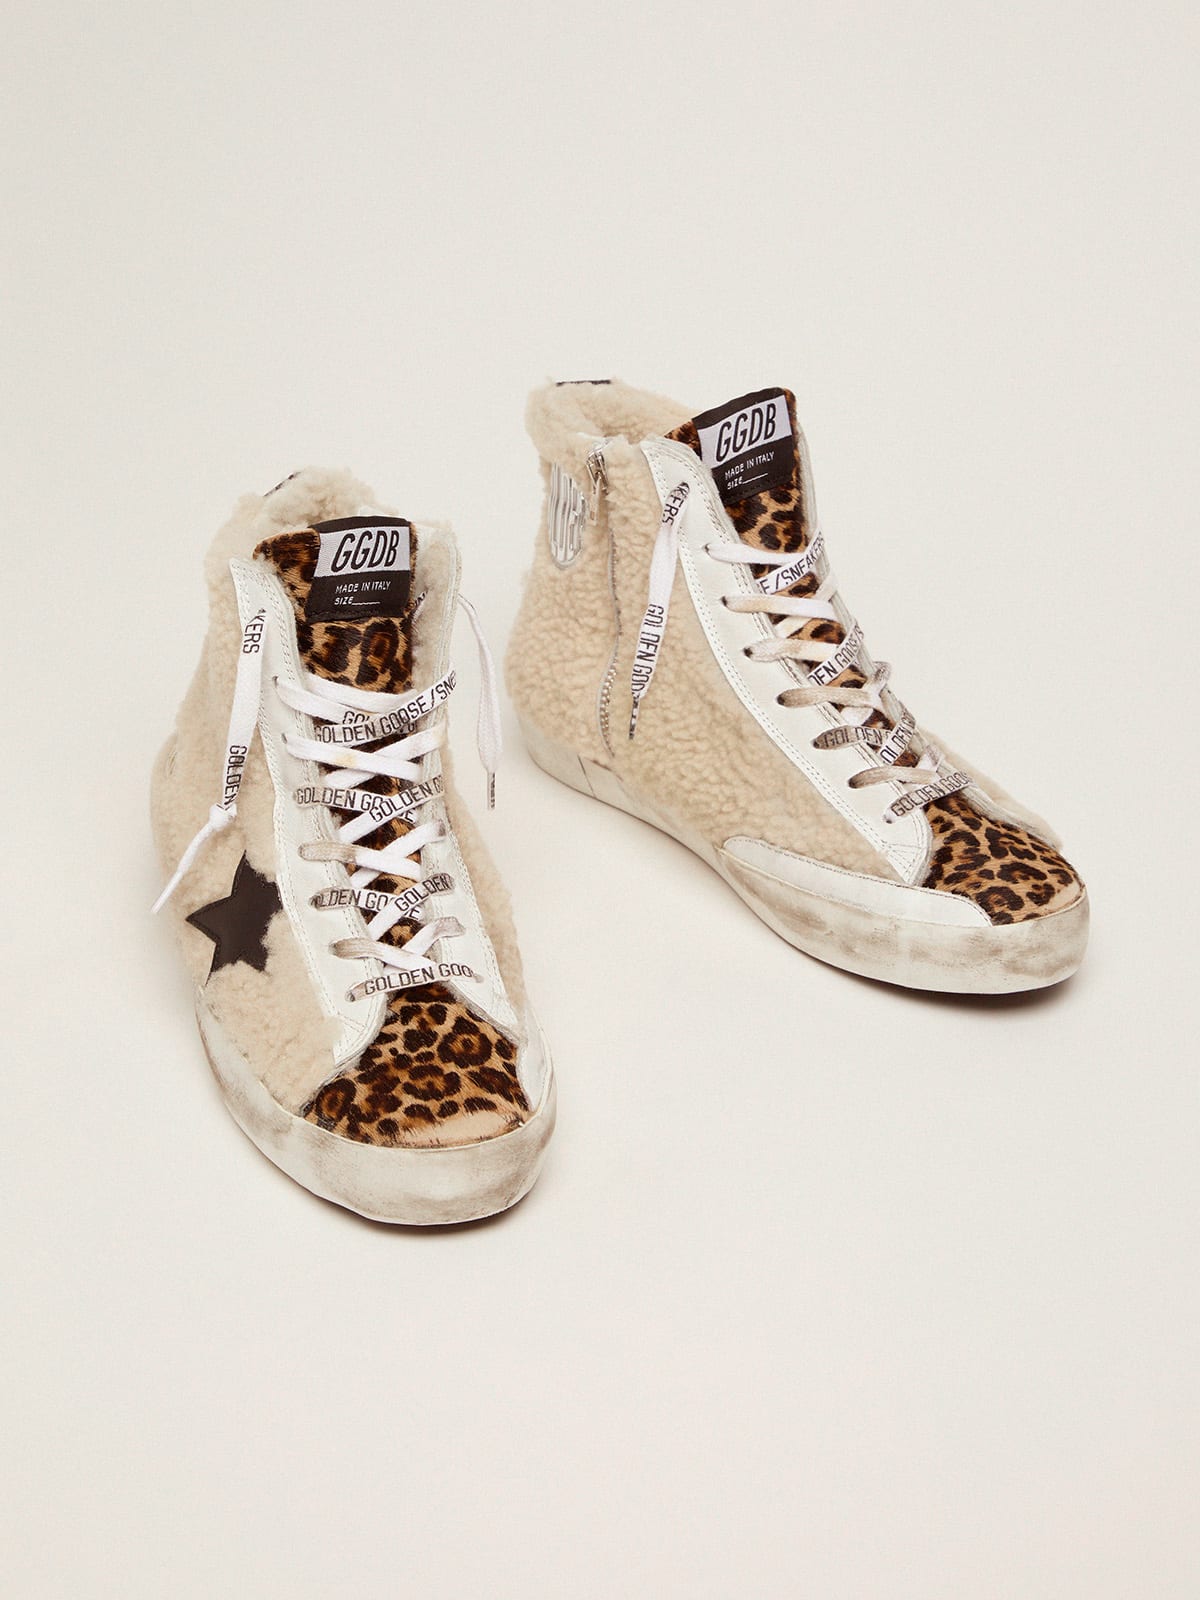 Golden Goose - Francy sneakers made of shearling and pony skin with a leopard print in 